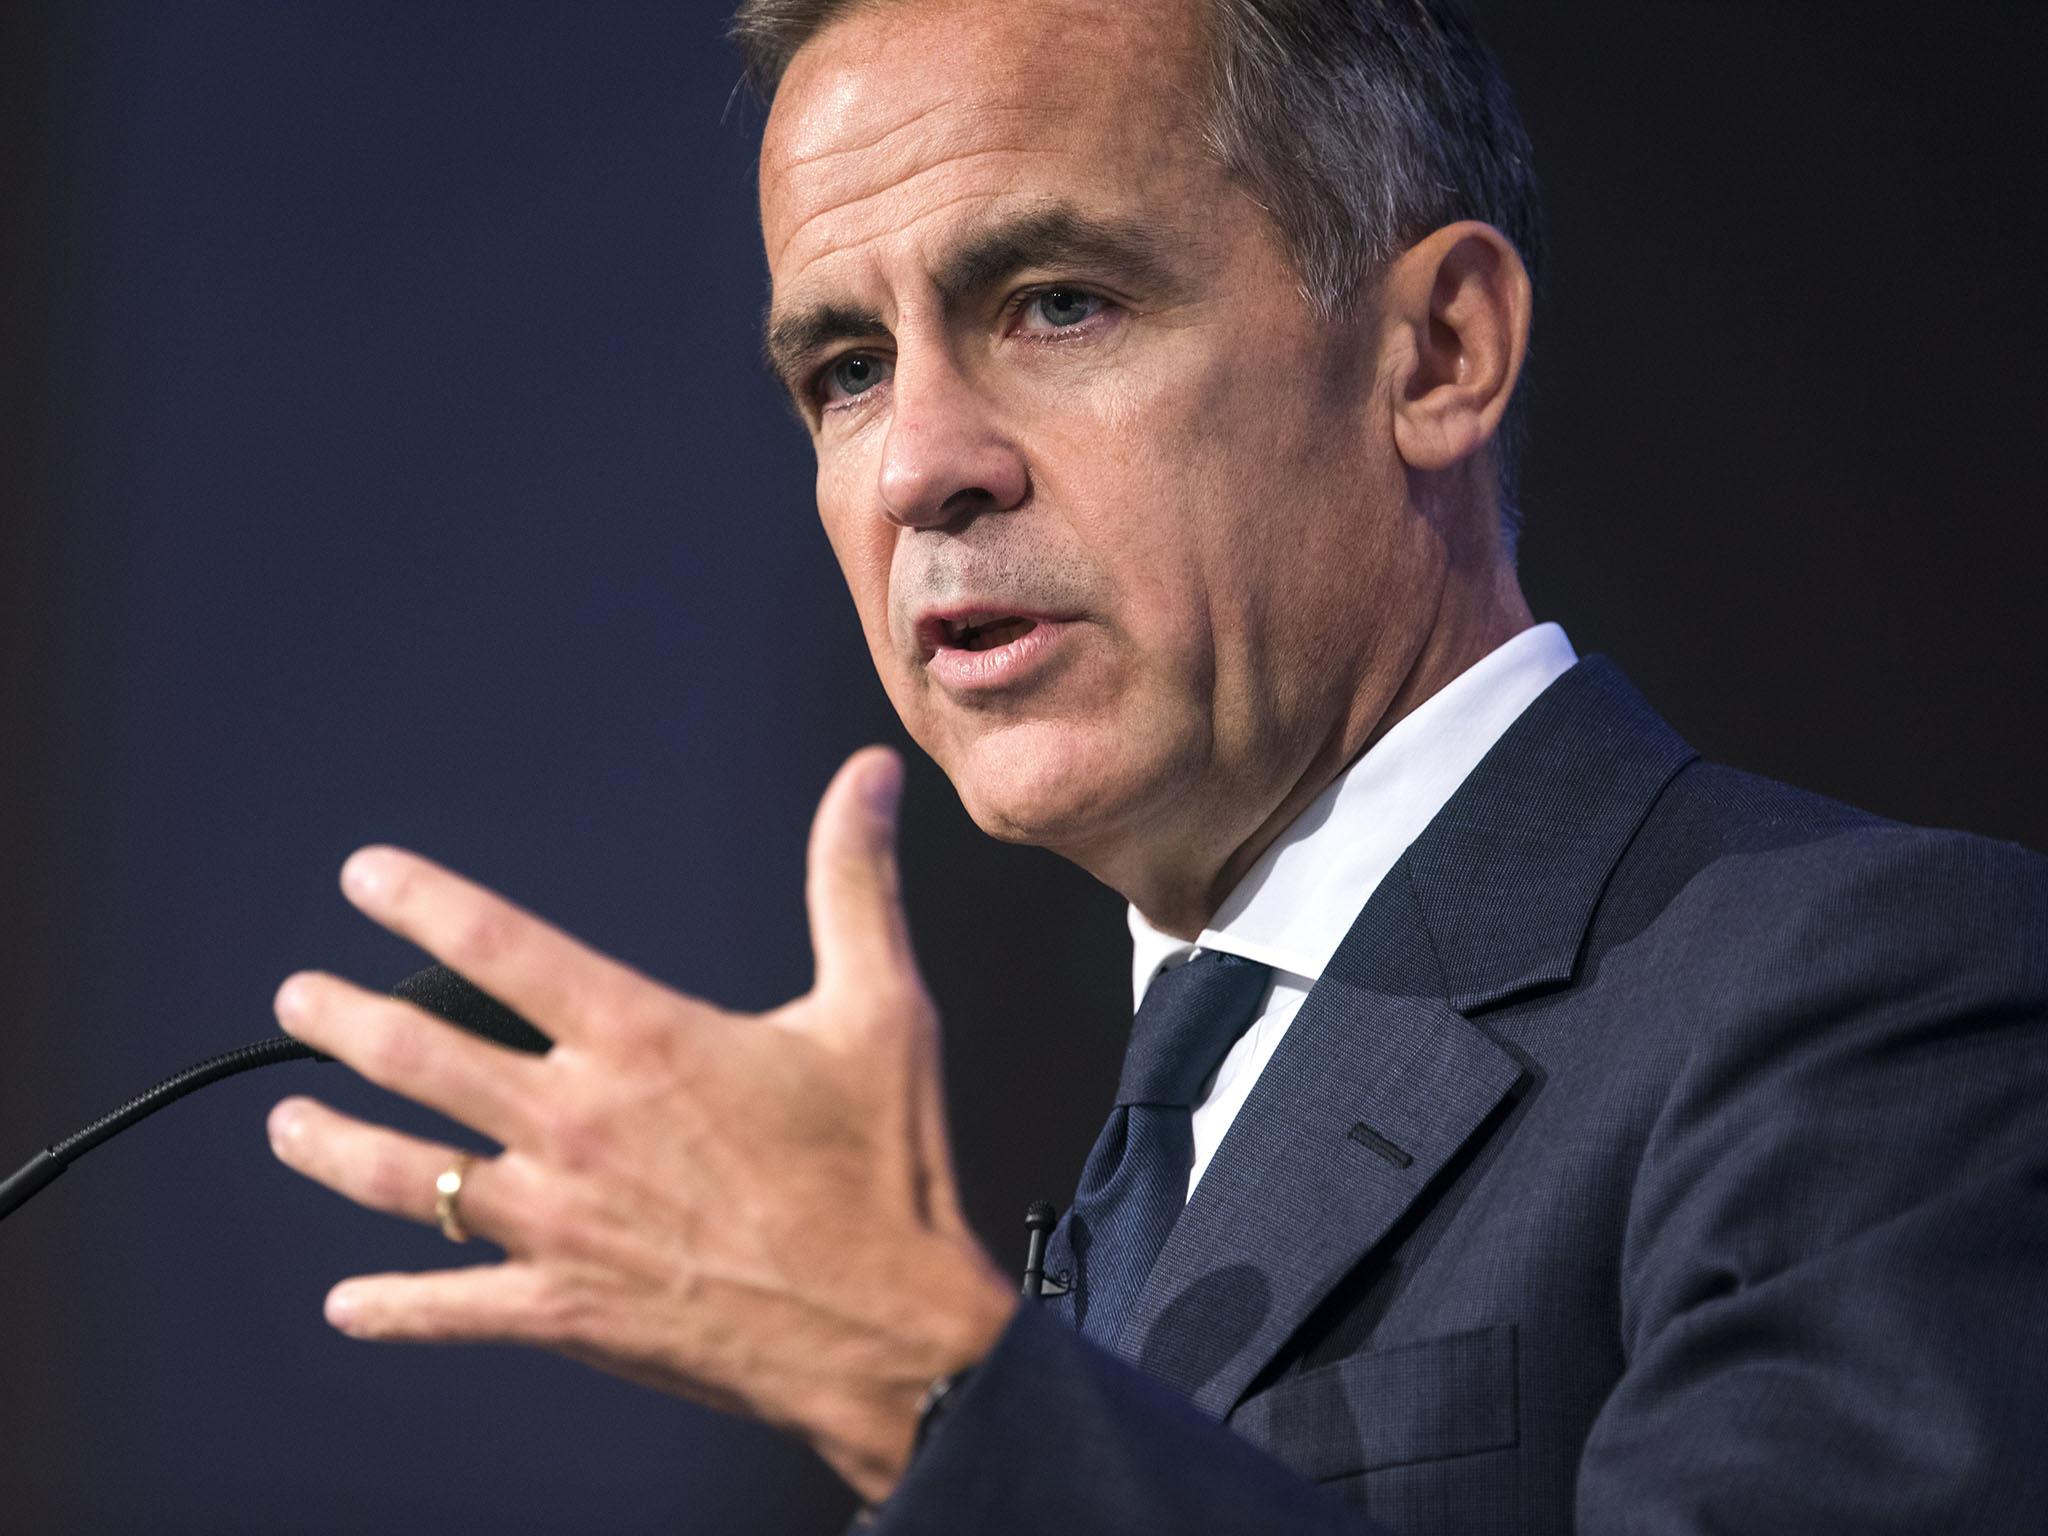 ‘Any reduction in openness with the EU is unlikely to be immediately compensated by new ties,’ insists Carney